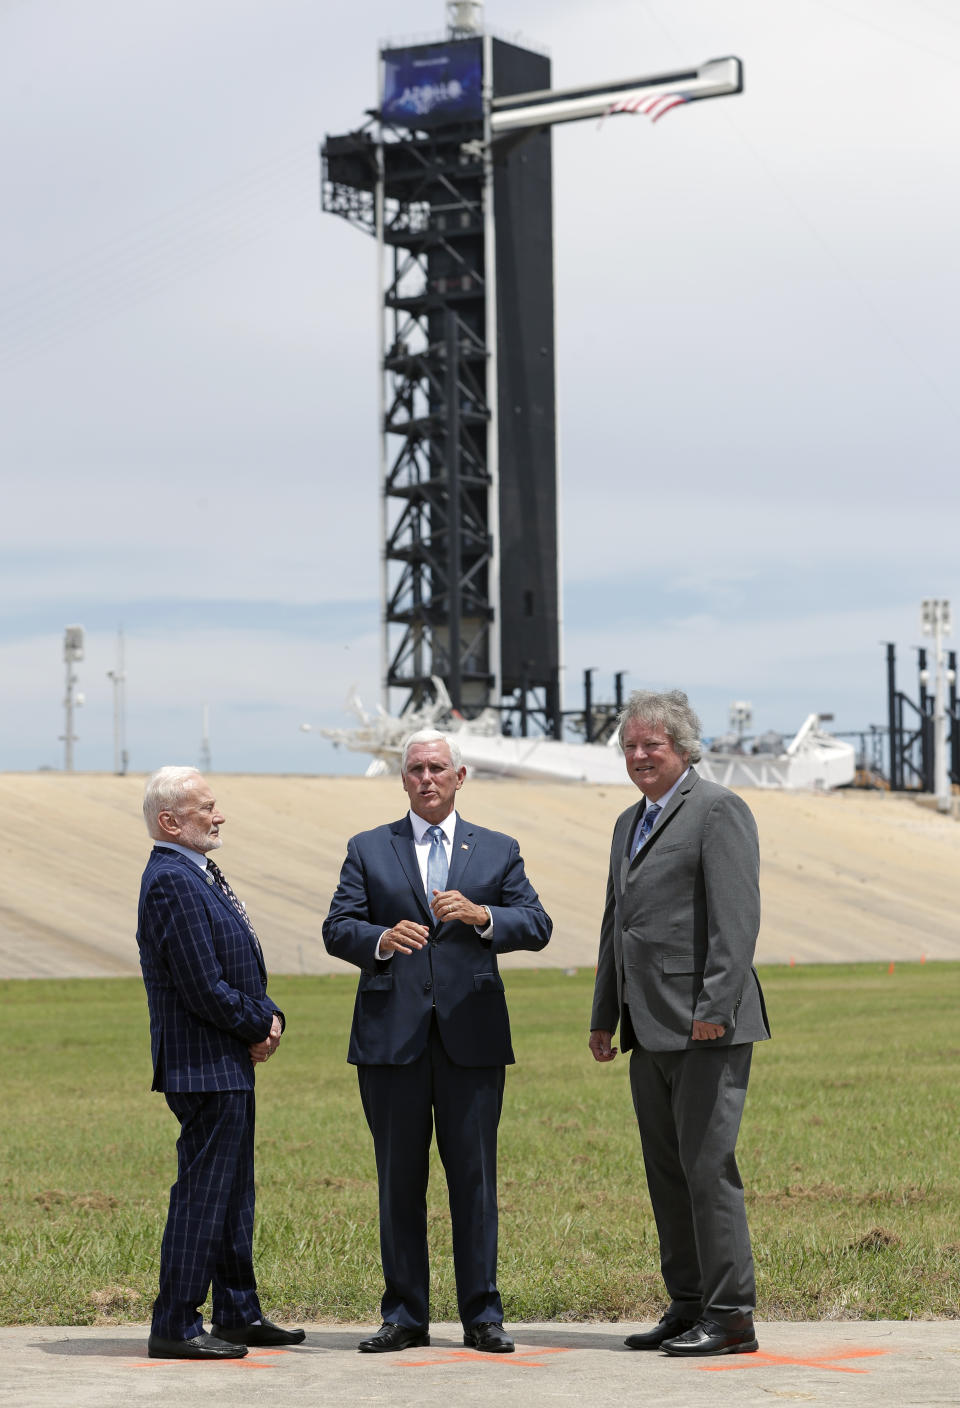 Apollo astronaut Buzz Aldrin, left, talks with Vice President Mike Pence, center, and Rick Armstrong, son of Apollo 11 astronaut Neil Armstrong as they gather at pad 39a the Kennedy Space Center where the launch of Apollo 11 took place 50 years ago on this anniversary of the moon landing, Saturday, July 20, 2019, in Cape Canaveral, Fla. (AP Photo/John Raoux)